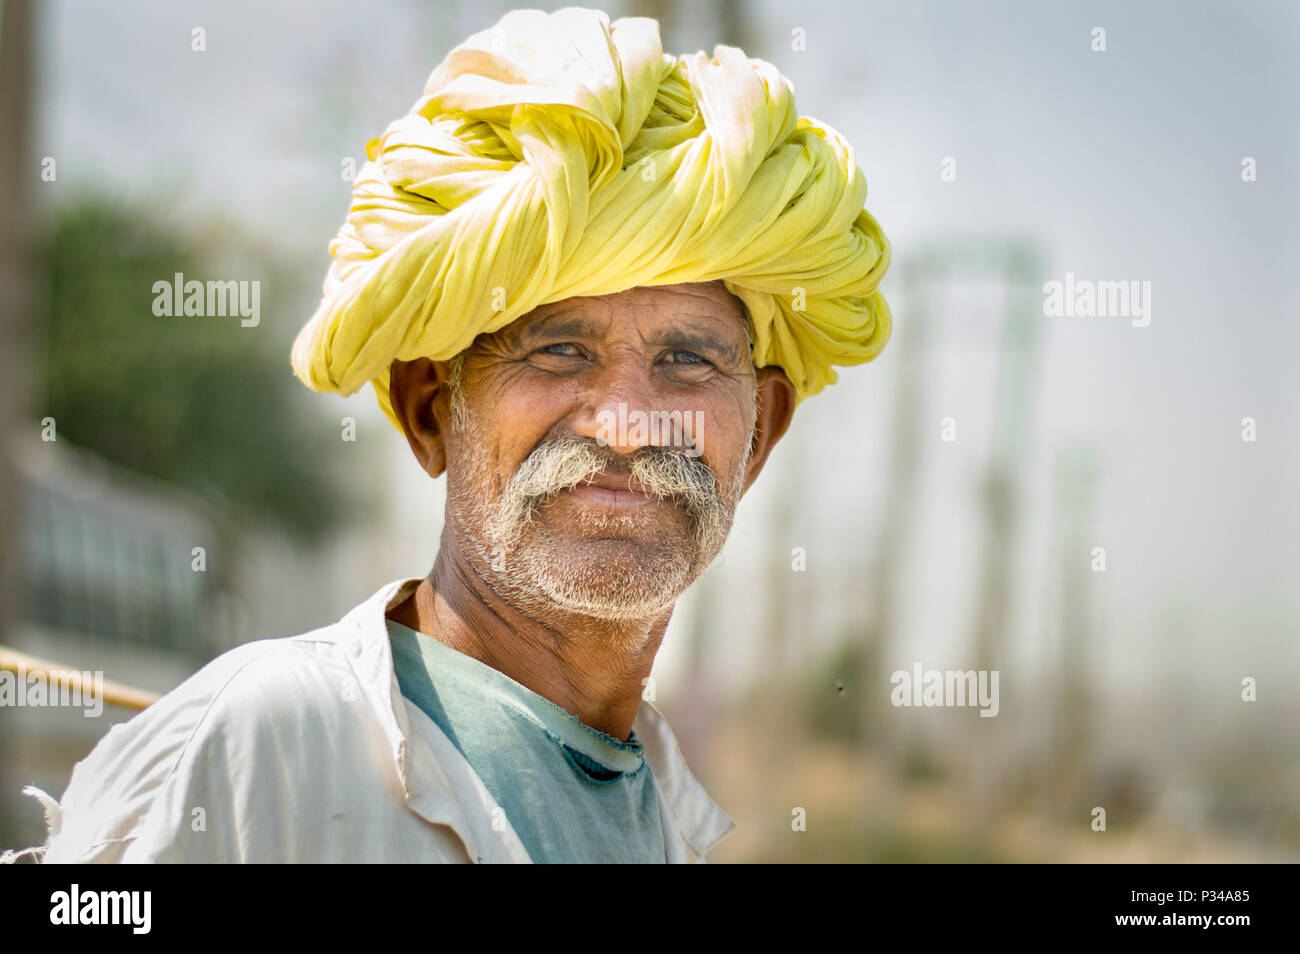 Man in the streets of Gurgaon, India. Stock Photo